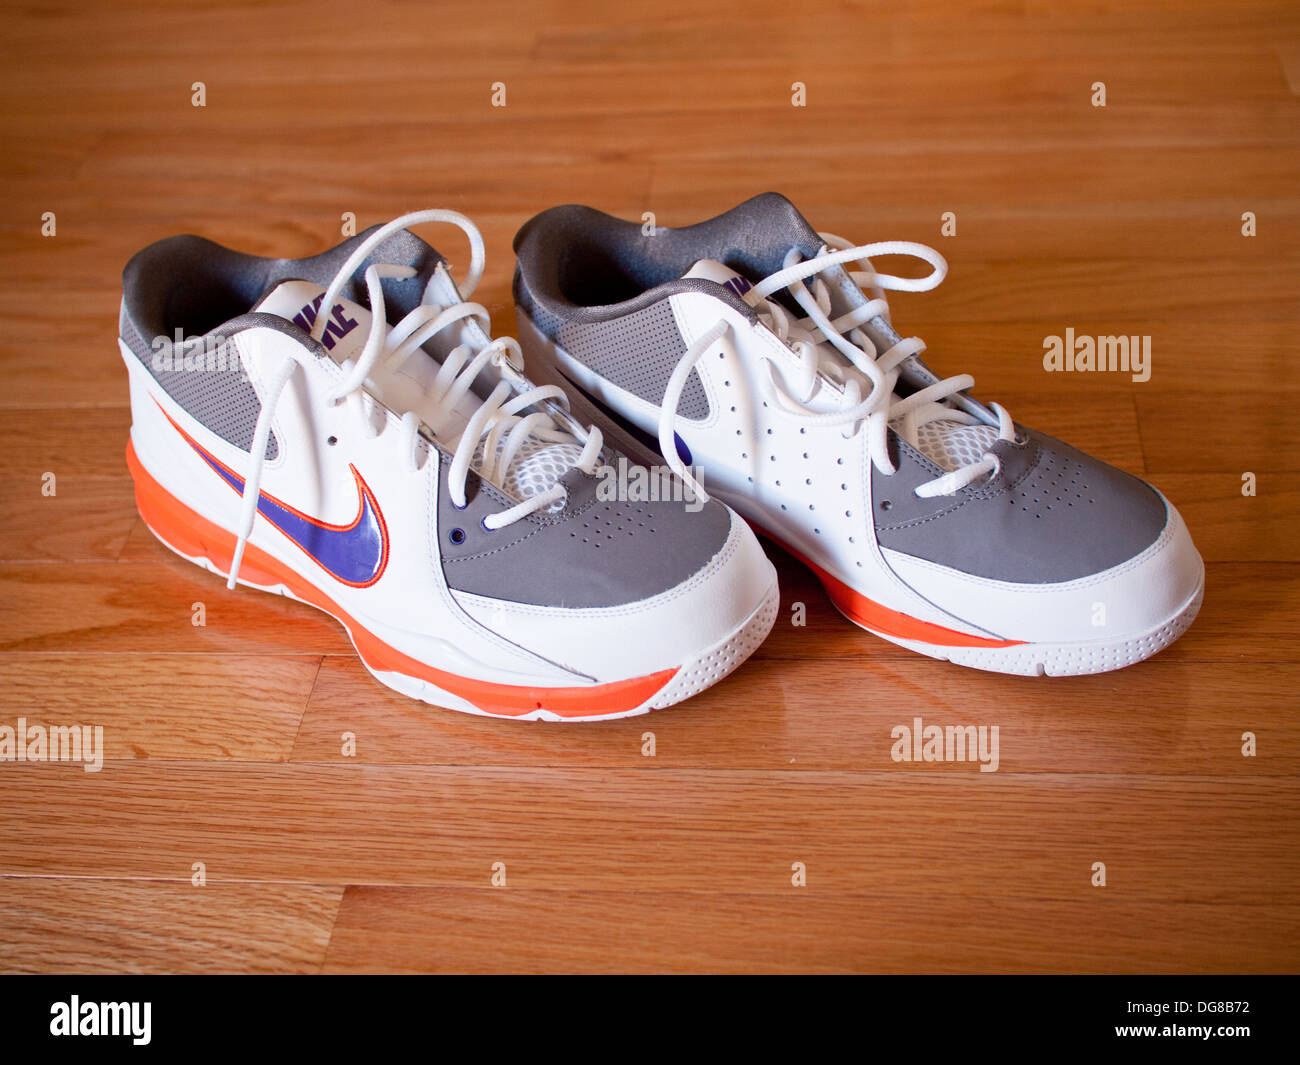 A pair of Nike Zoom Go Low Steve Nash men's basketball shoes. Stock Photo